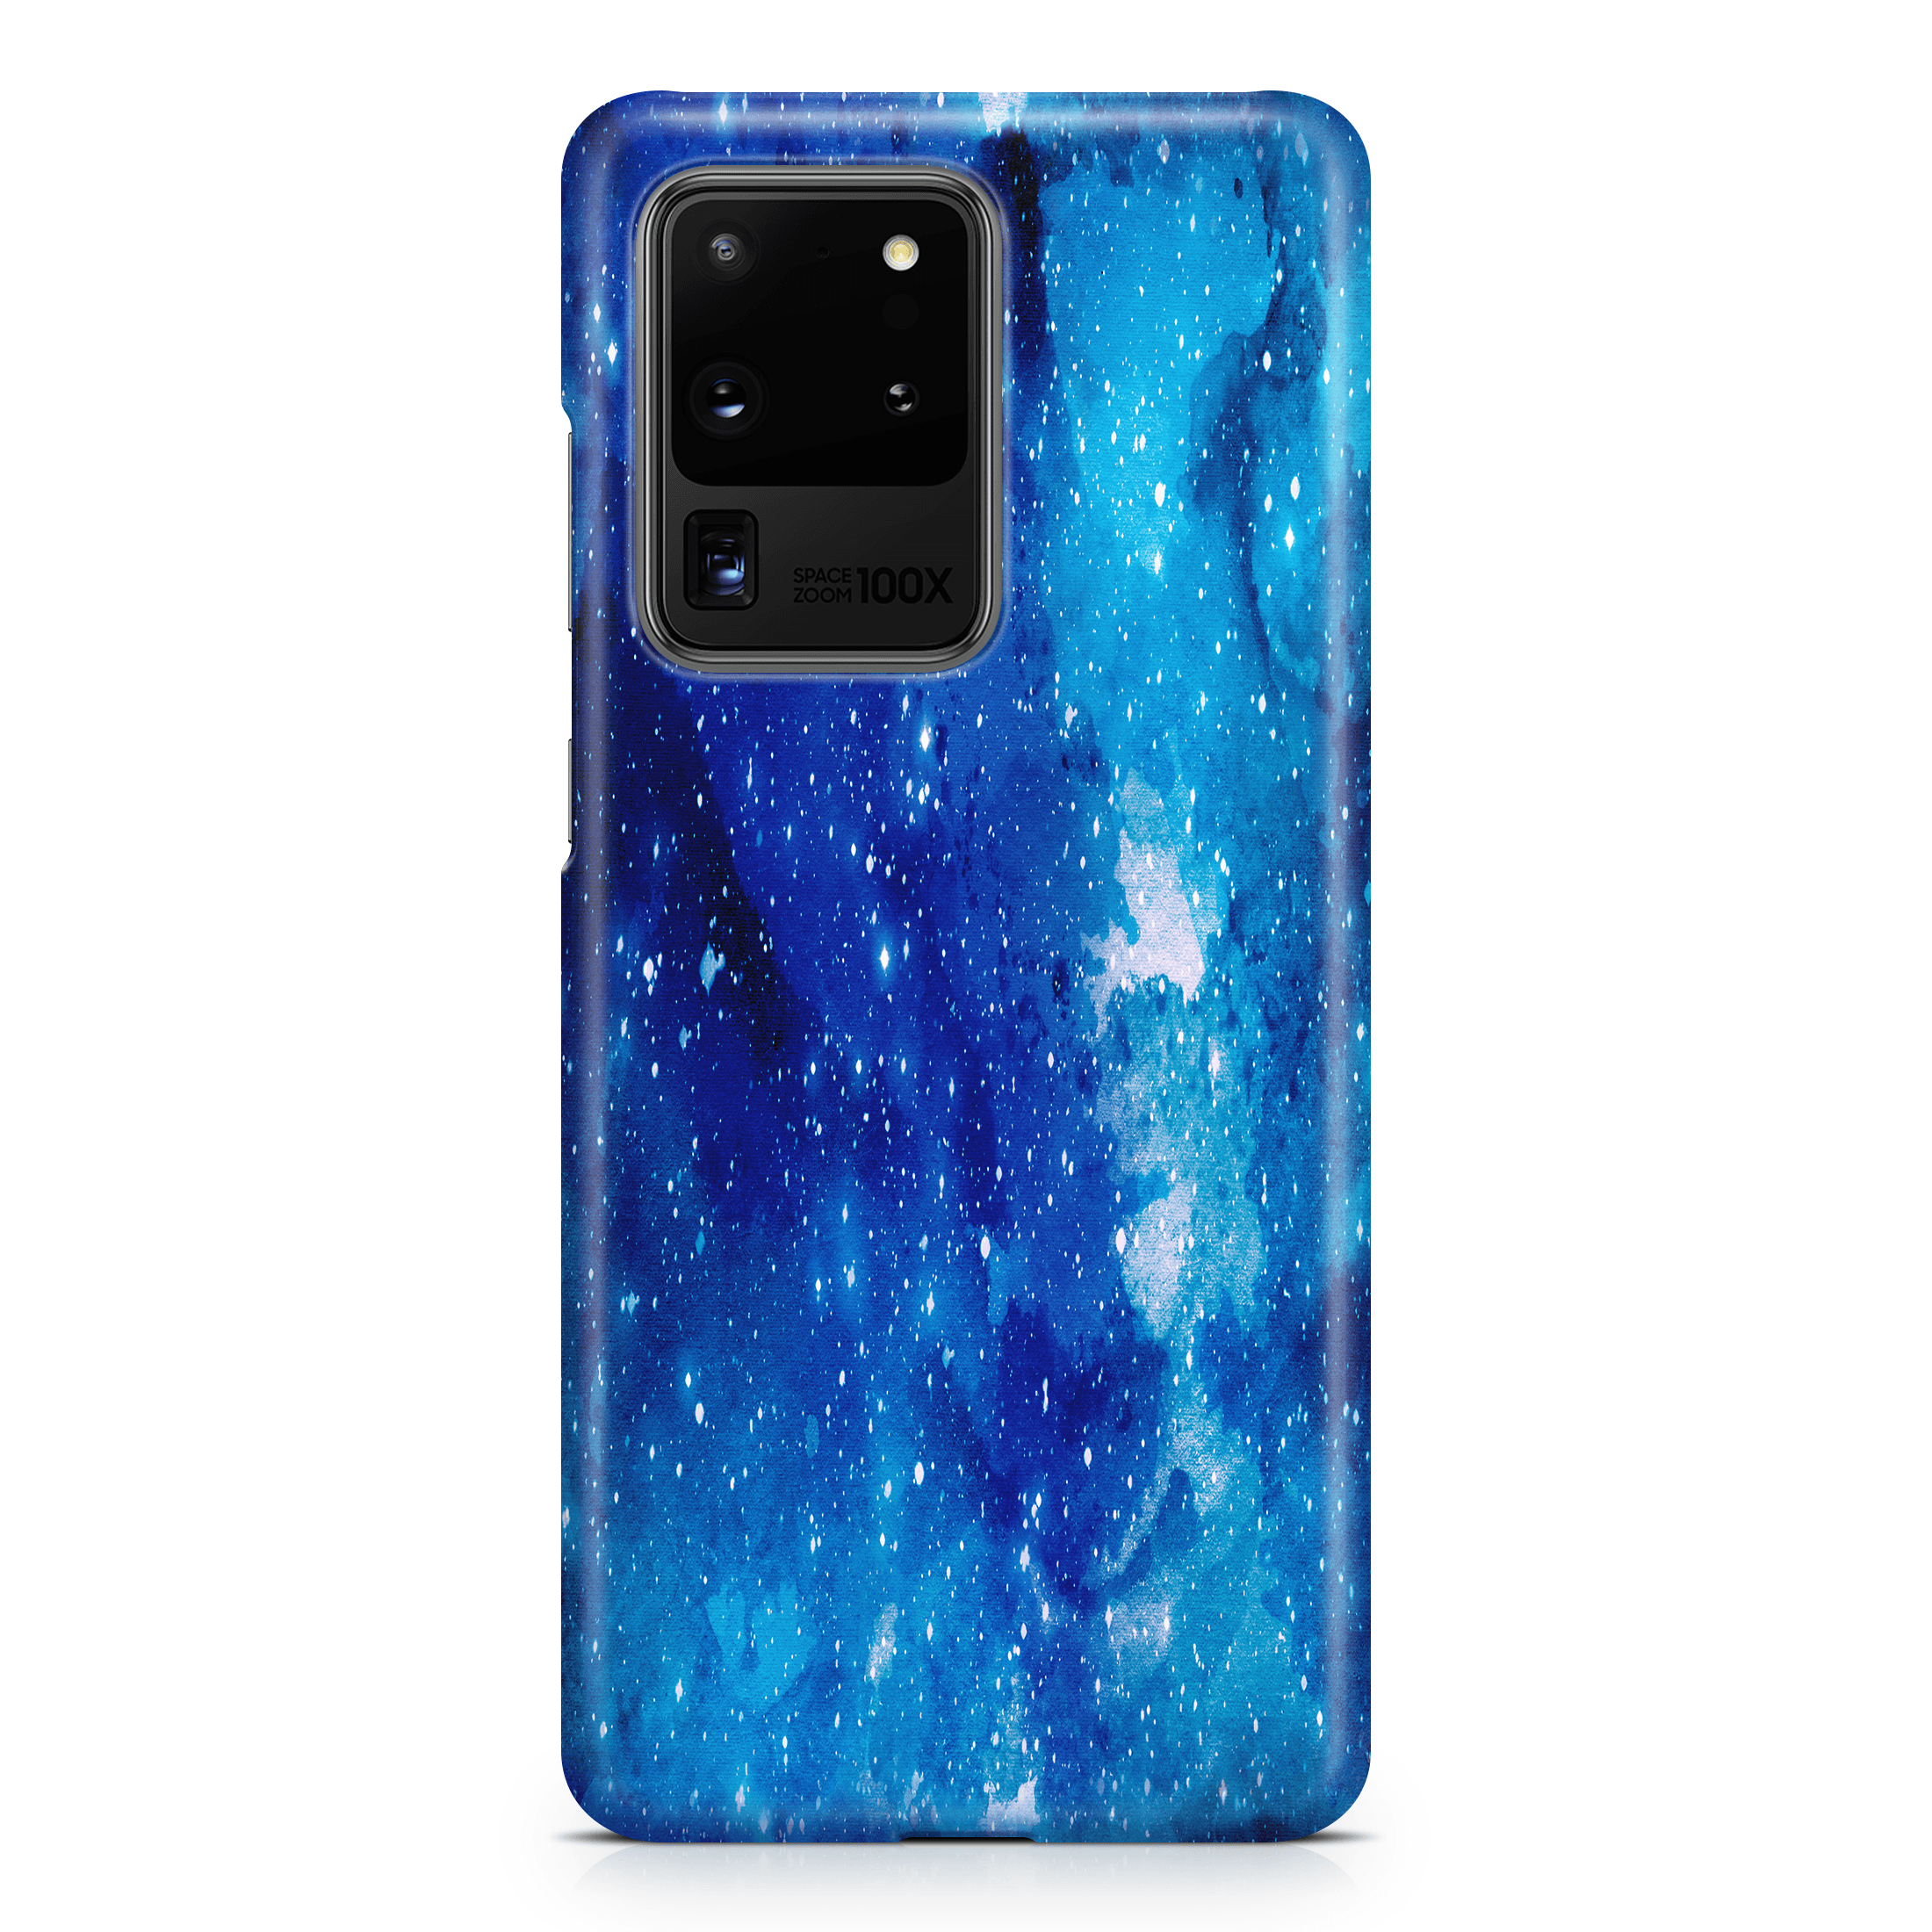 Blue Space - Samsung phone case designs by CaseSwagger